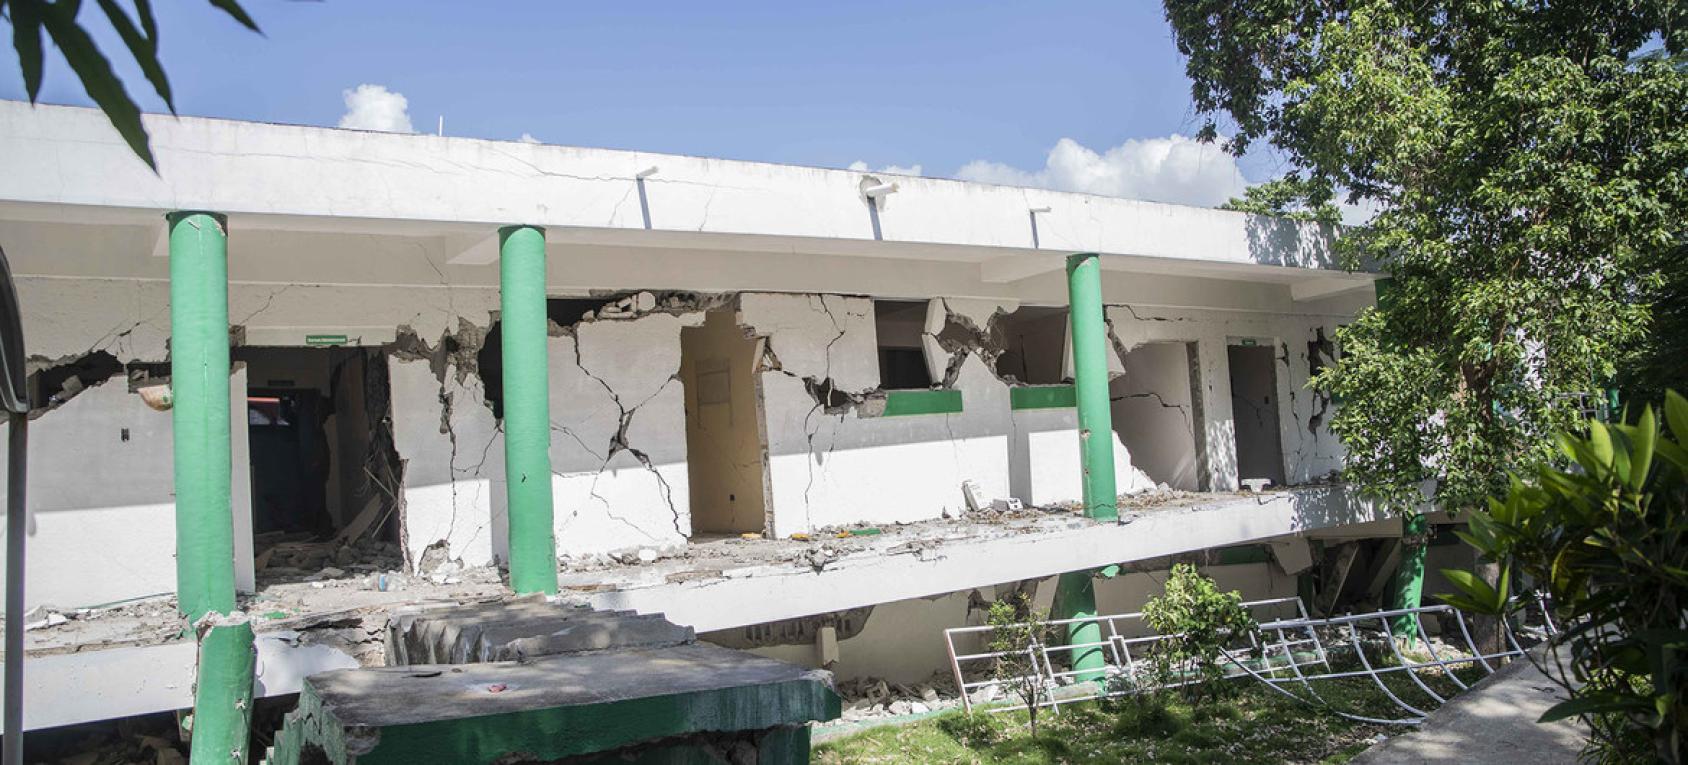 The photo shows the structural damage to the Hôpital de Référence Communautaire de l’Asile in the south-west of Haiti after the 14 August 2021 earthquake.